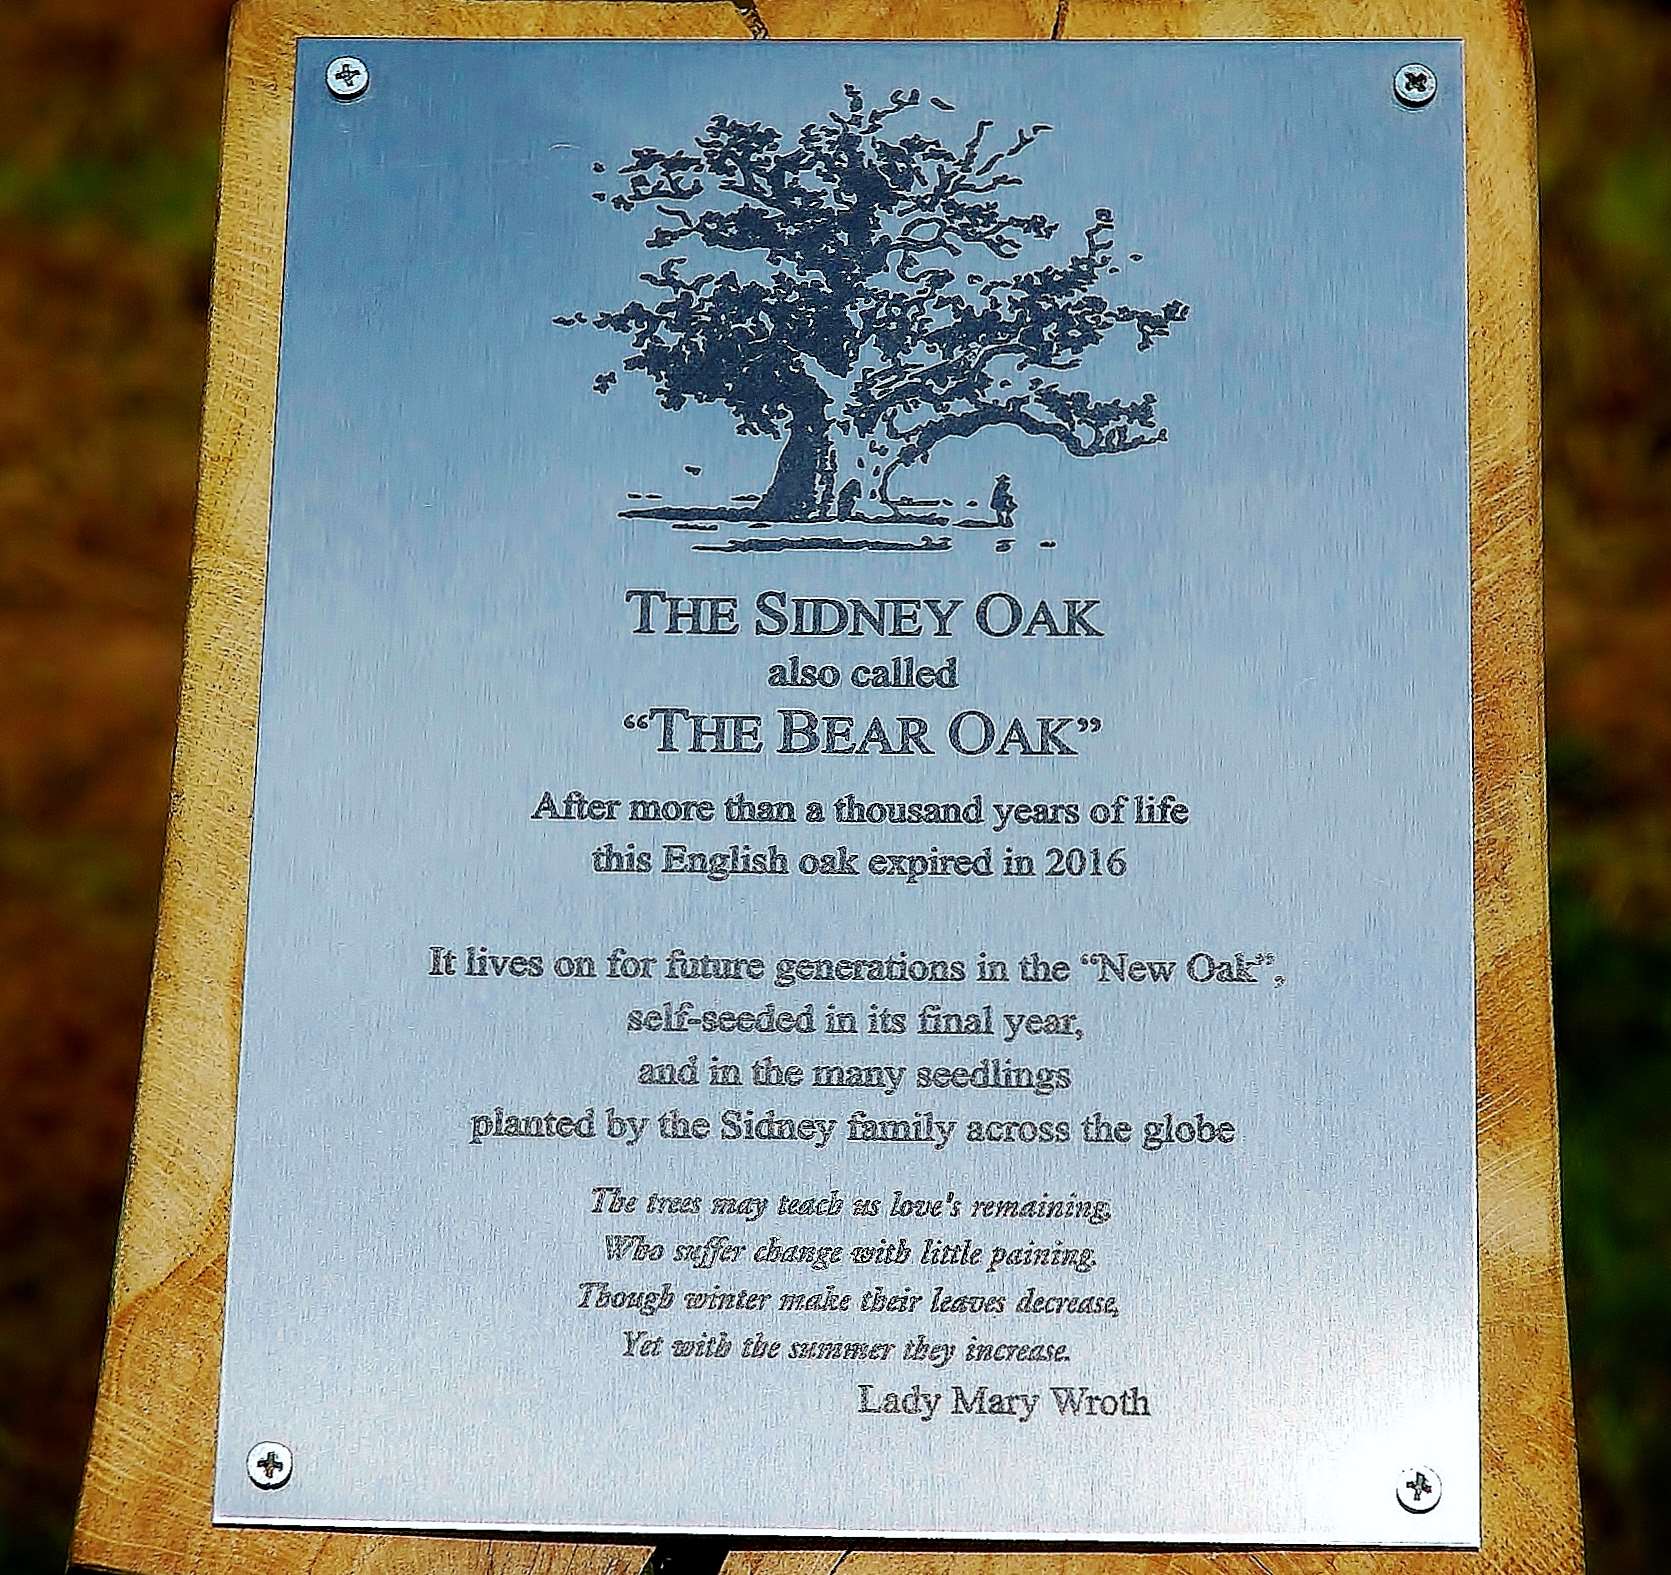 The plaque to the Sidney Oak